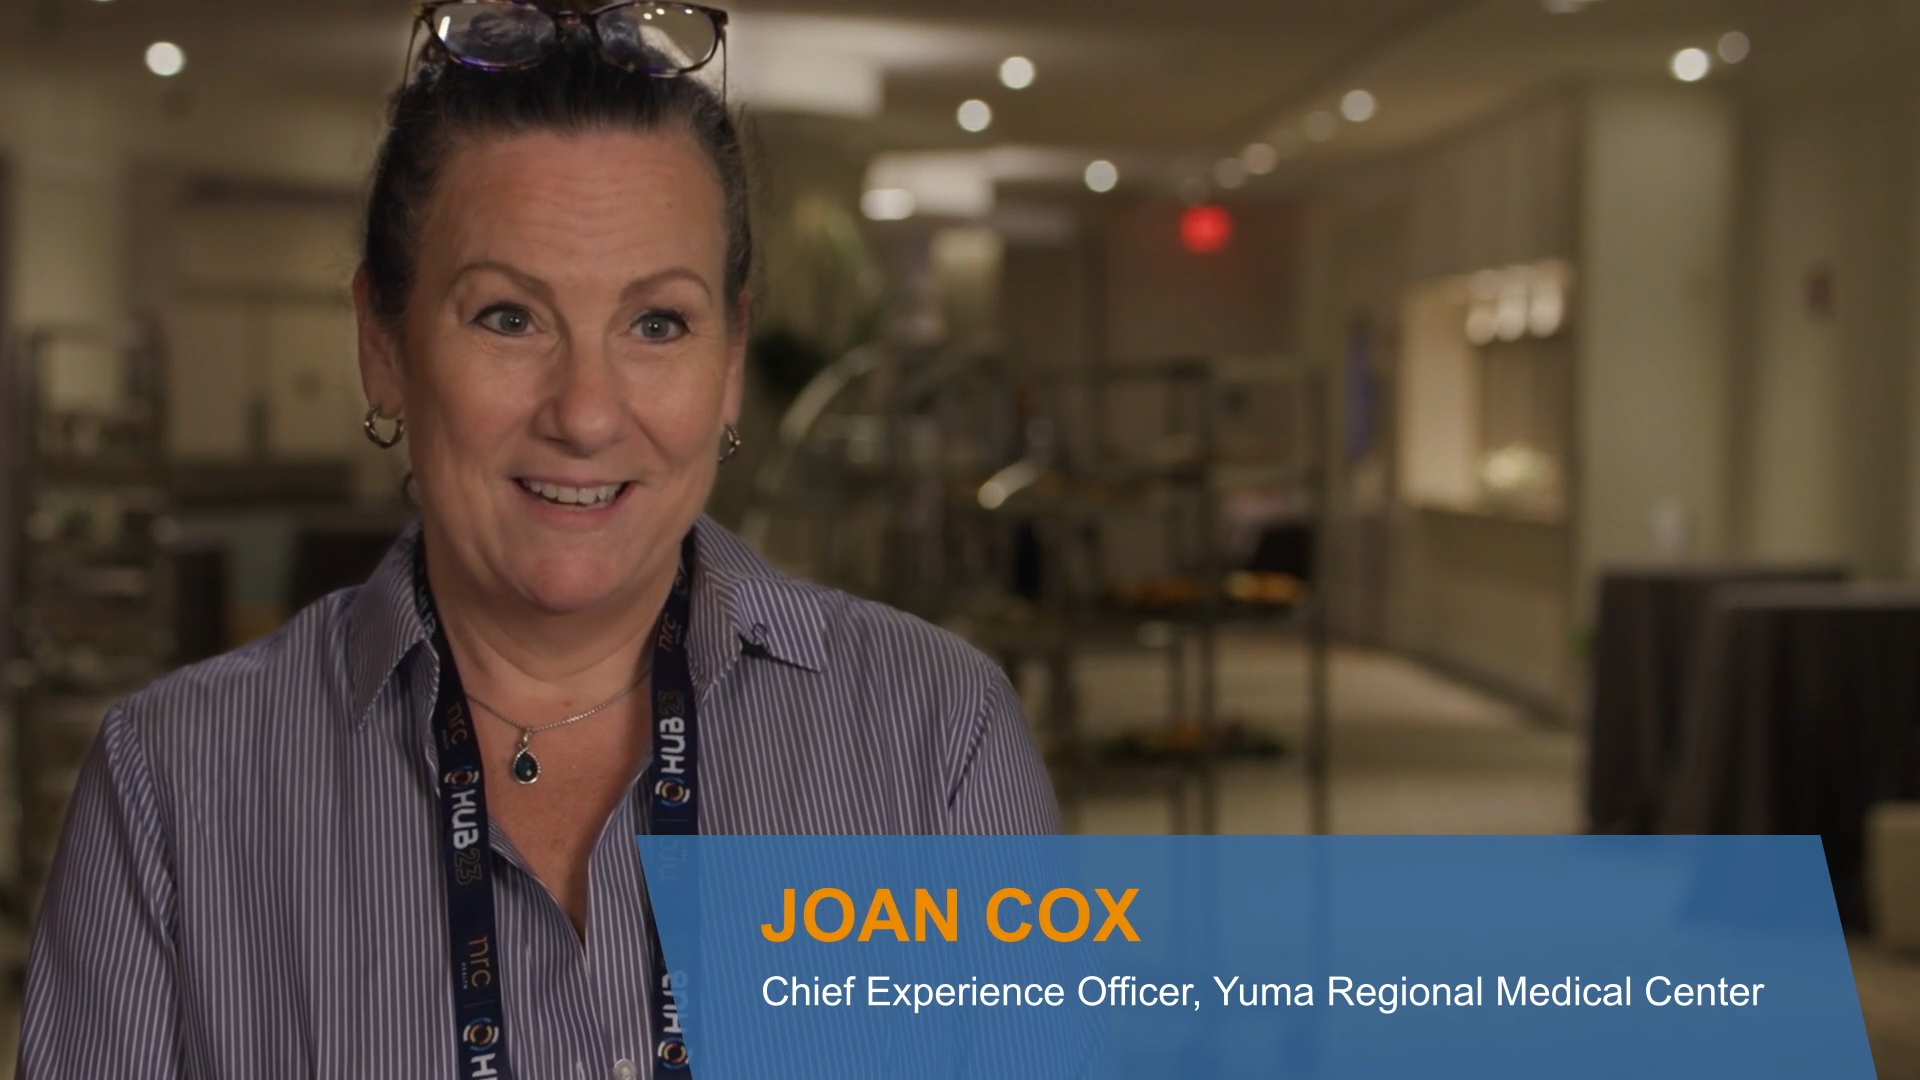 “The concept of being able to come back to the human element and that really critical connection that takes place in all aspects of the care continuum, that's what's really exciting for me and for the organization with our relationship with NRC." - Joan Cox, Chief Experience Officer, Yuma Regional Medical Center